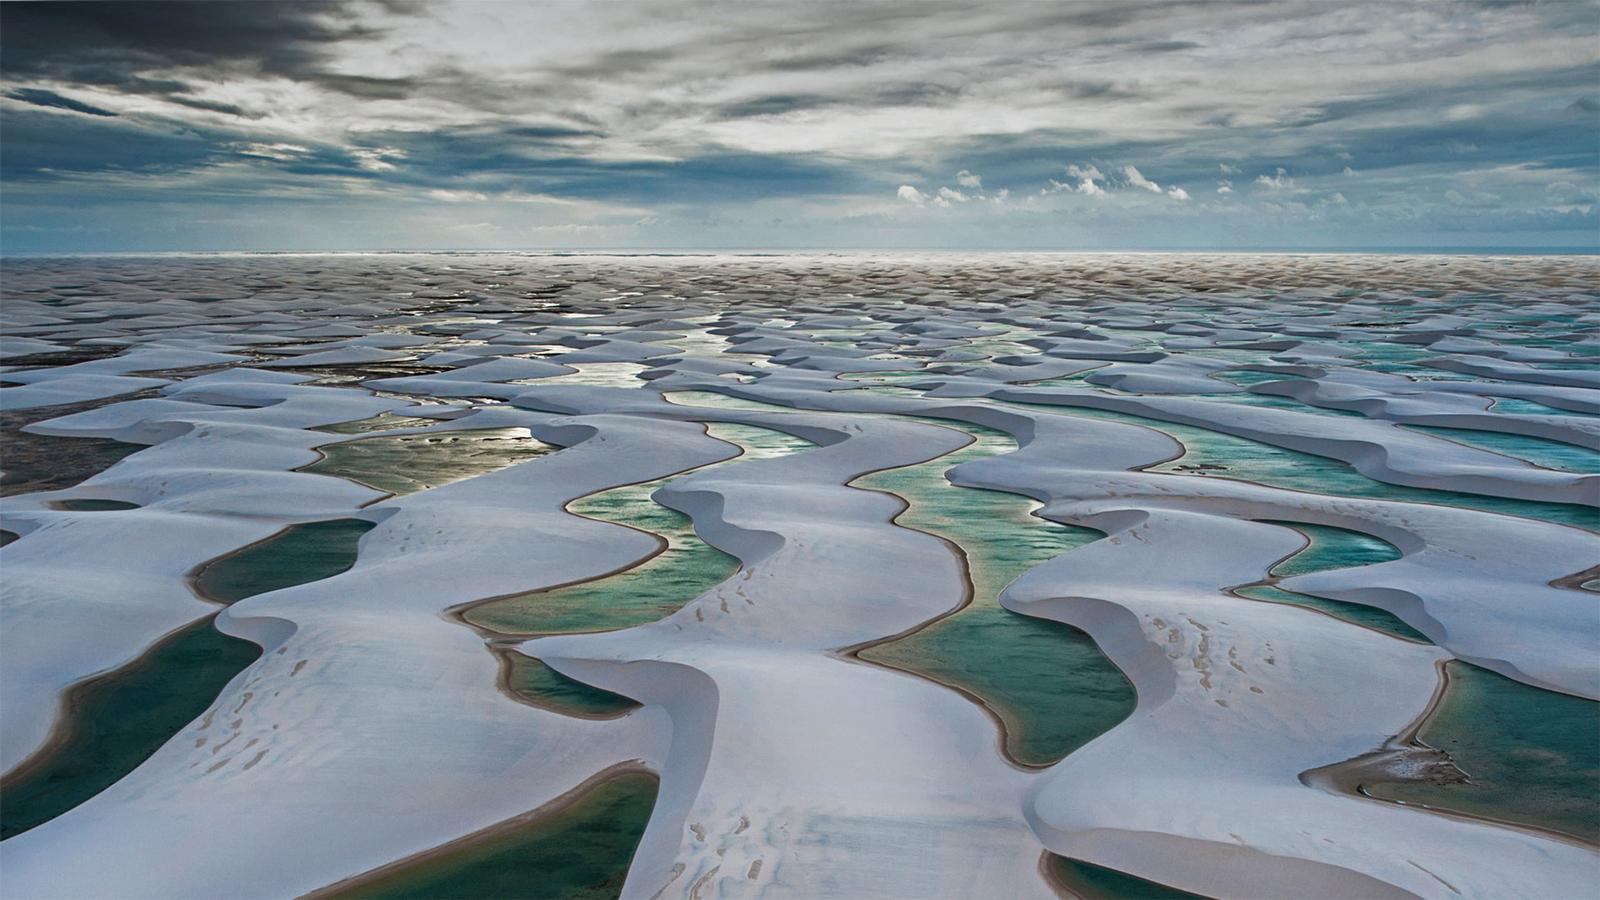 Can You Match These Natural Wonders to Their Locations? Lencois Maranhenses National Park, Brazil